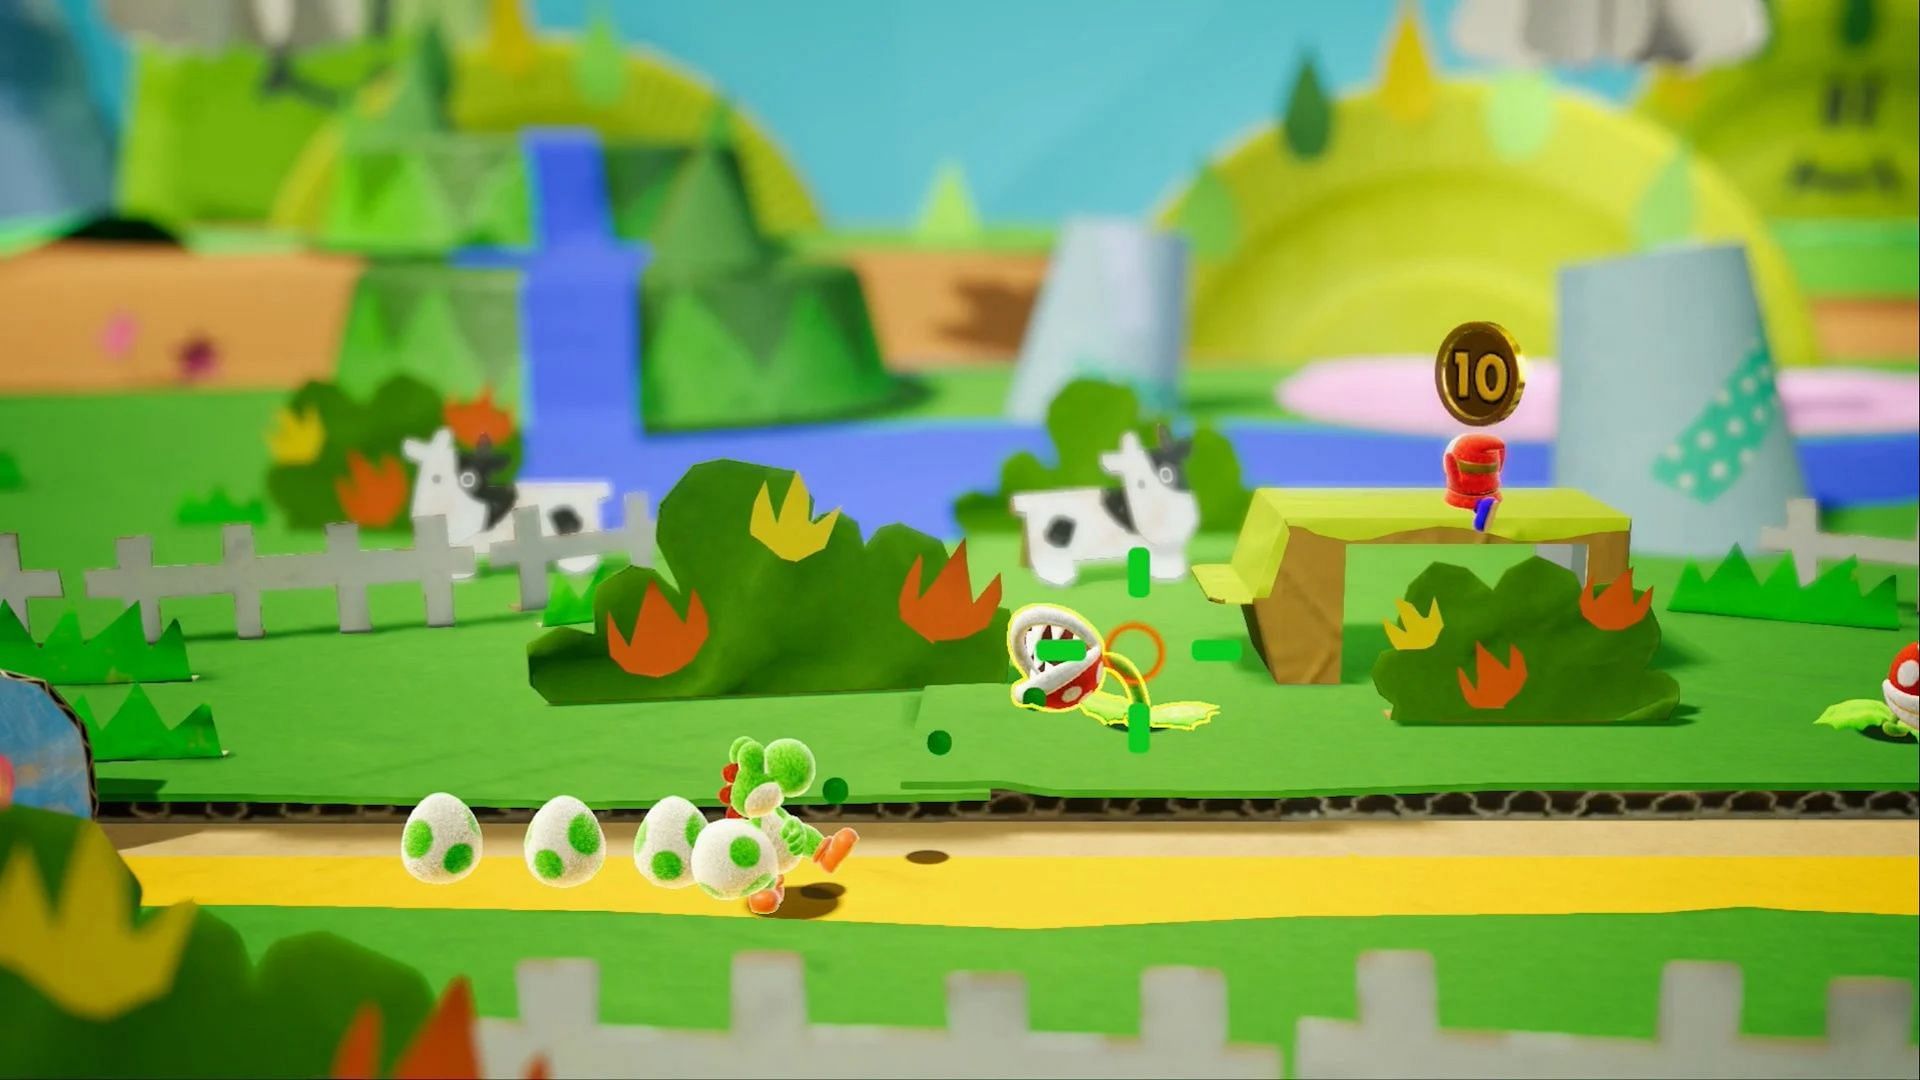 Despite compromises, Yoshi&#039;s Crafted World features stunning visuals for a handheld game (Image via Nintendo)